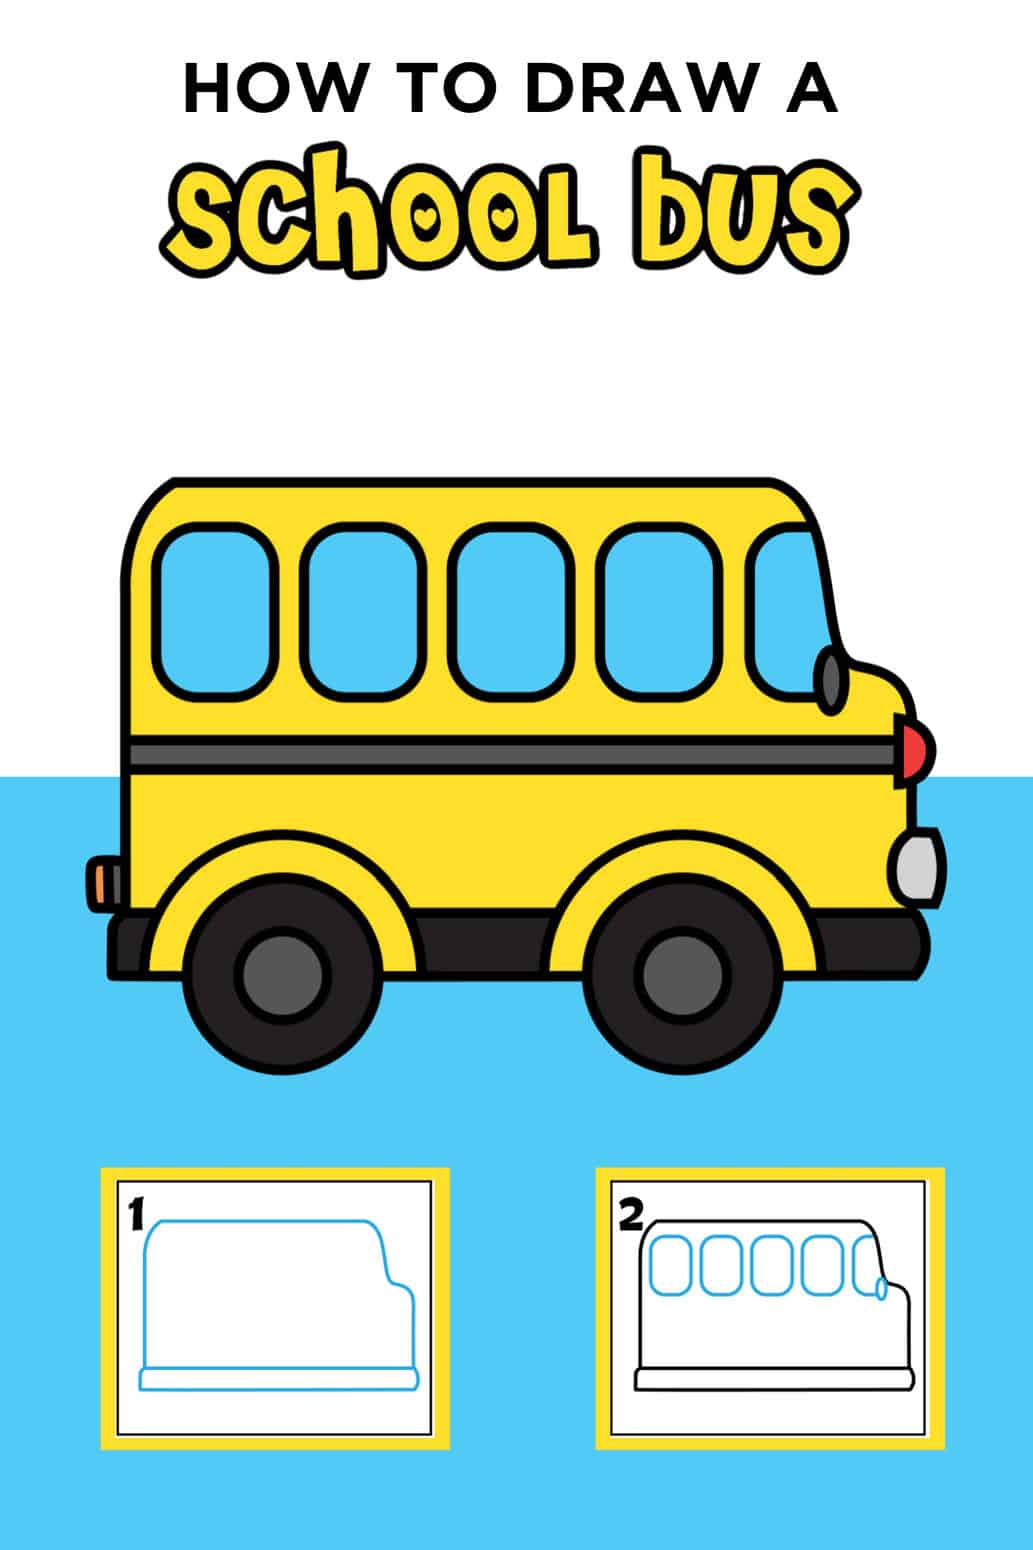 School Bus clip art Vectors graphic art designs in editable .ai .eps .svg  .cdr format free and easy download unlimit id:19332